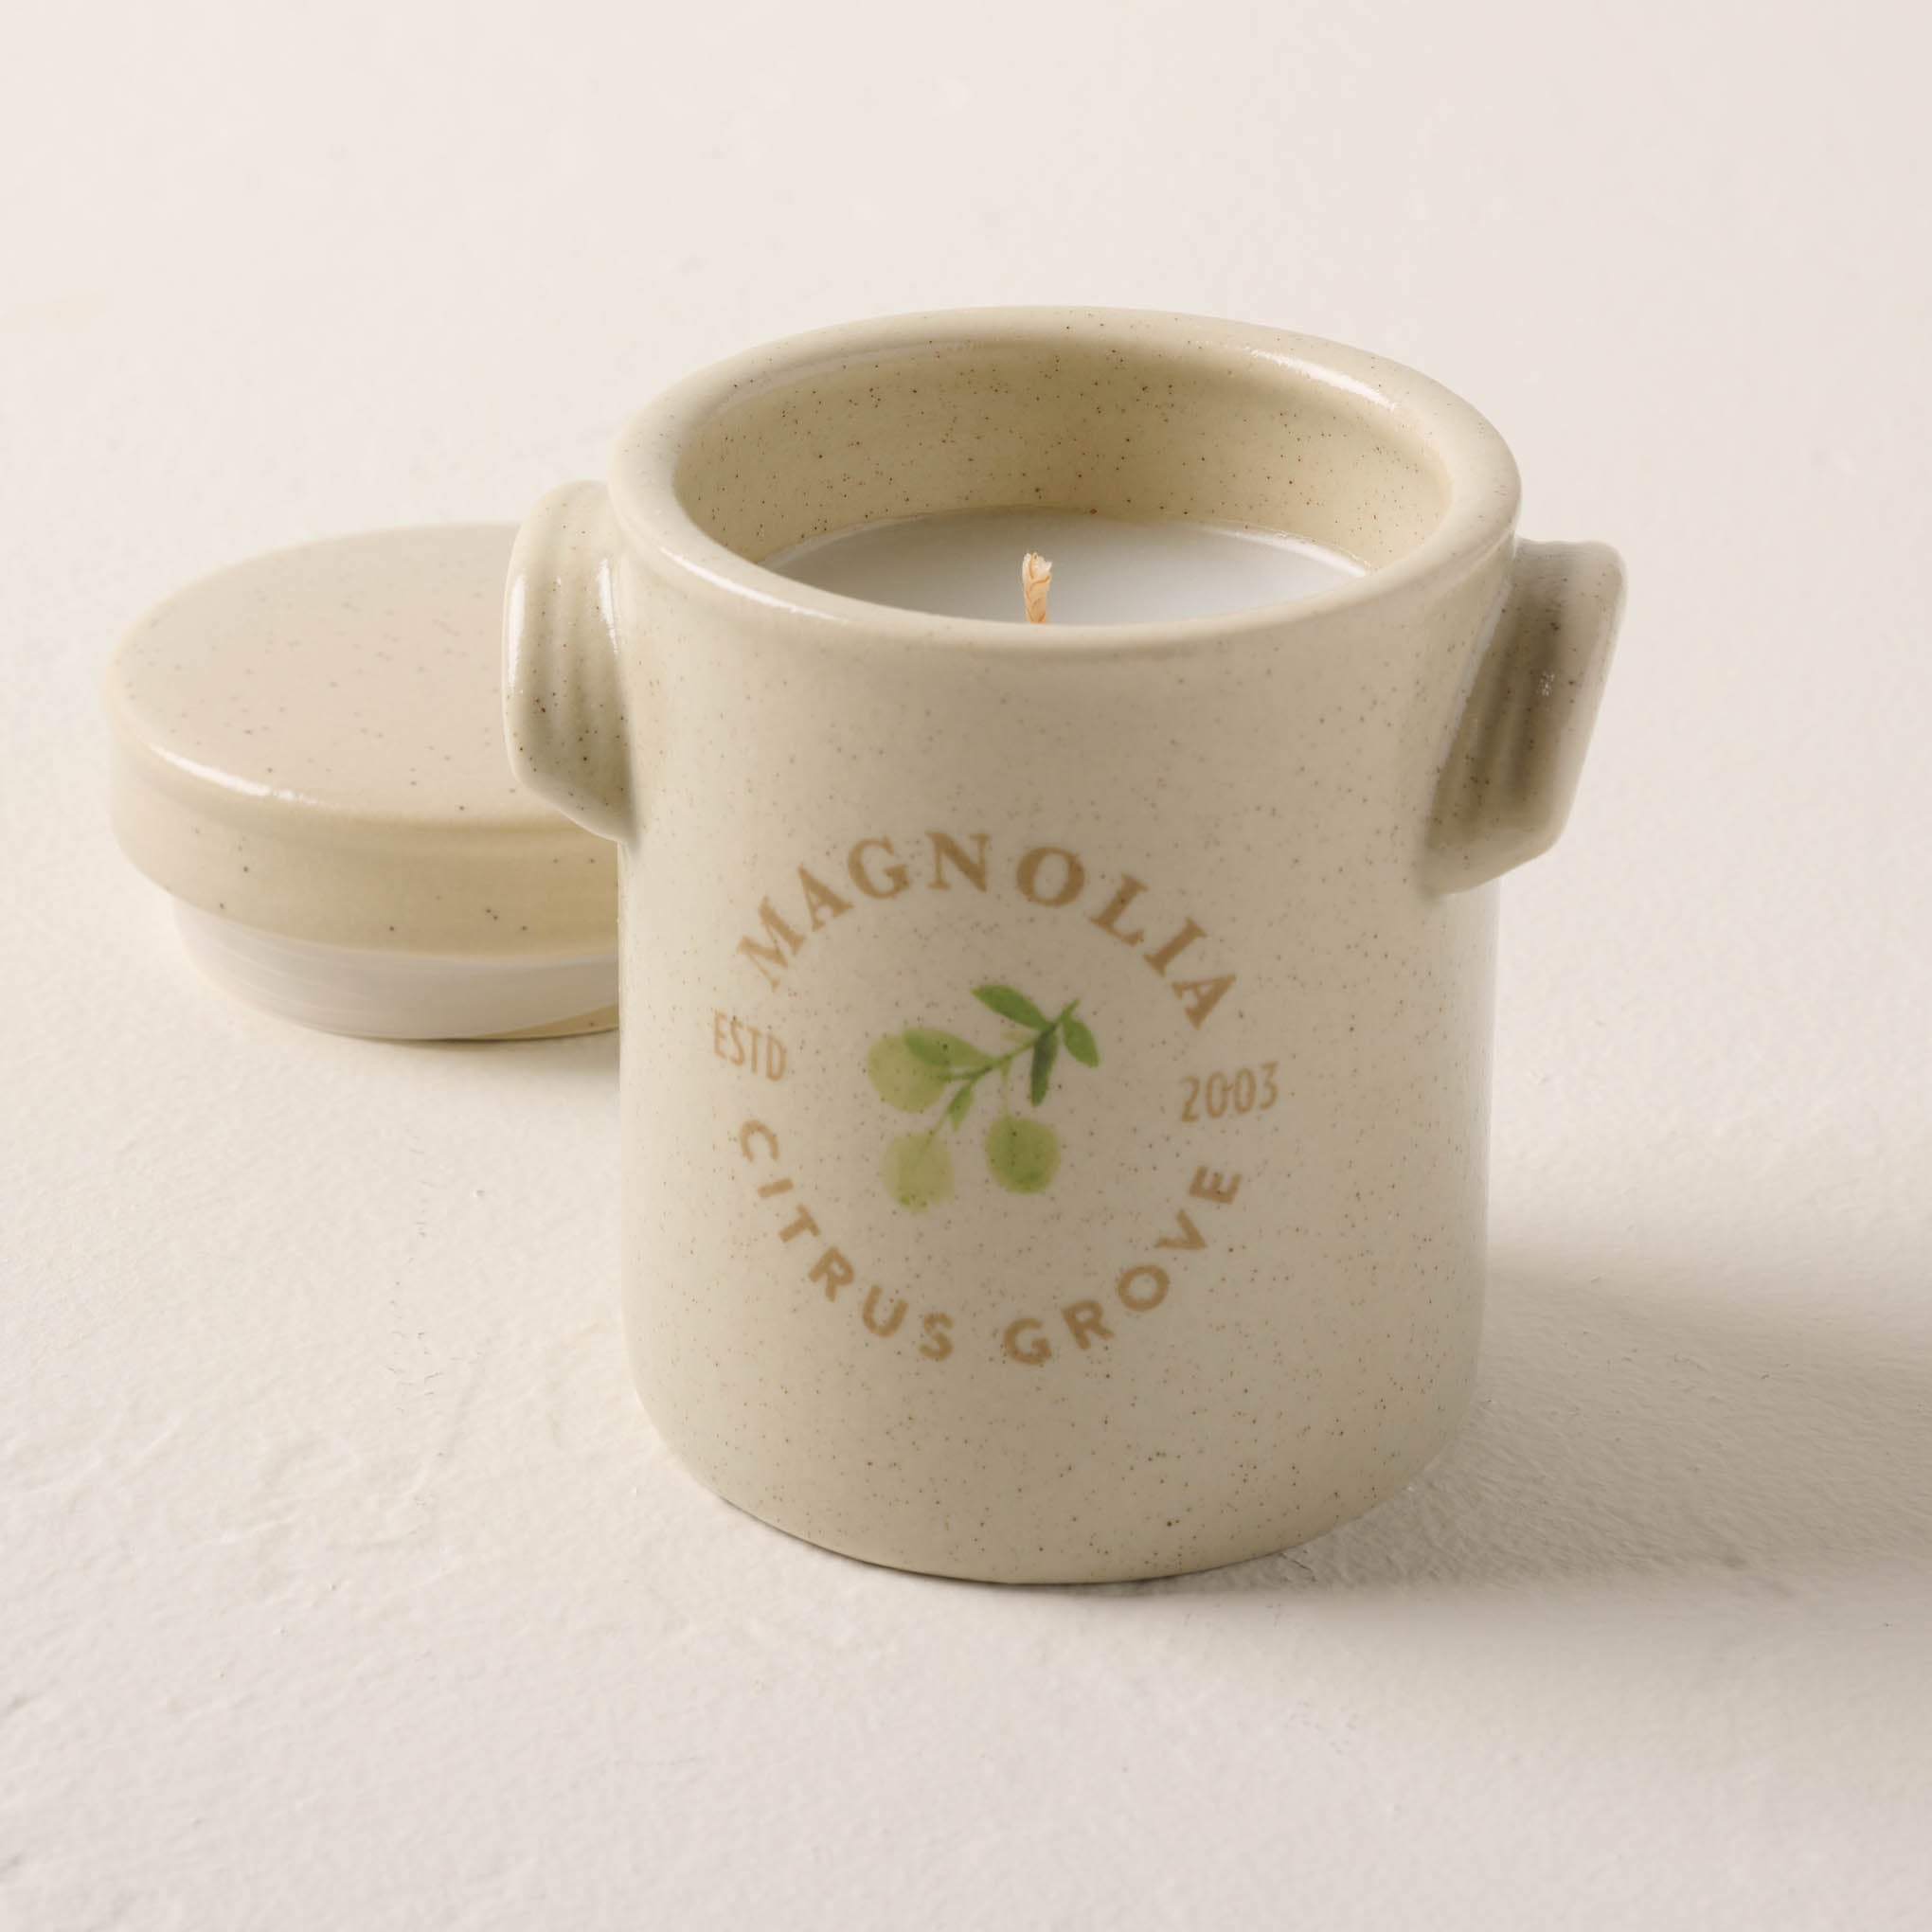 citrus grove scented magnolia candle  On sale for $19.20, discounted from $24.00